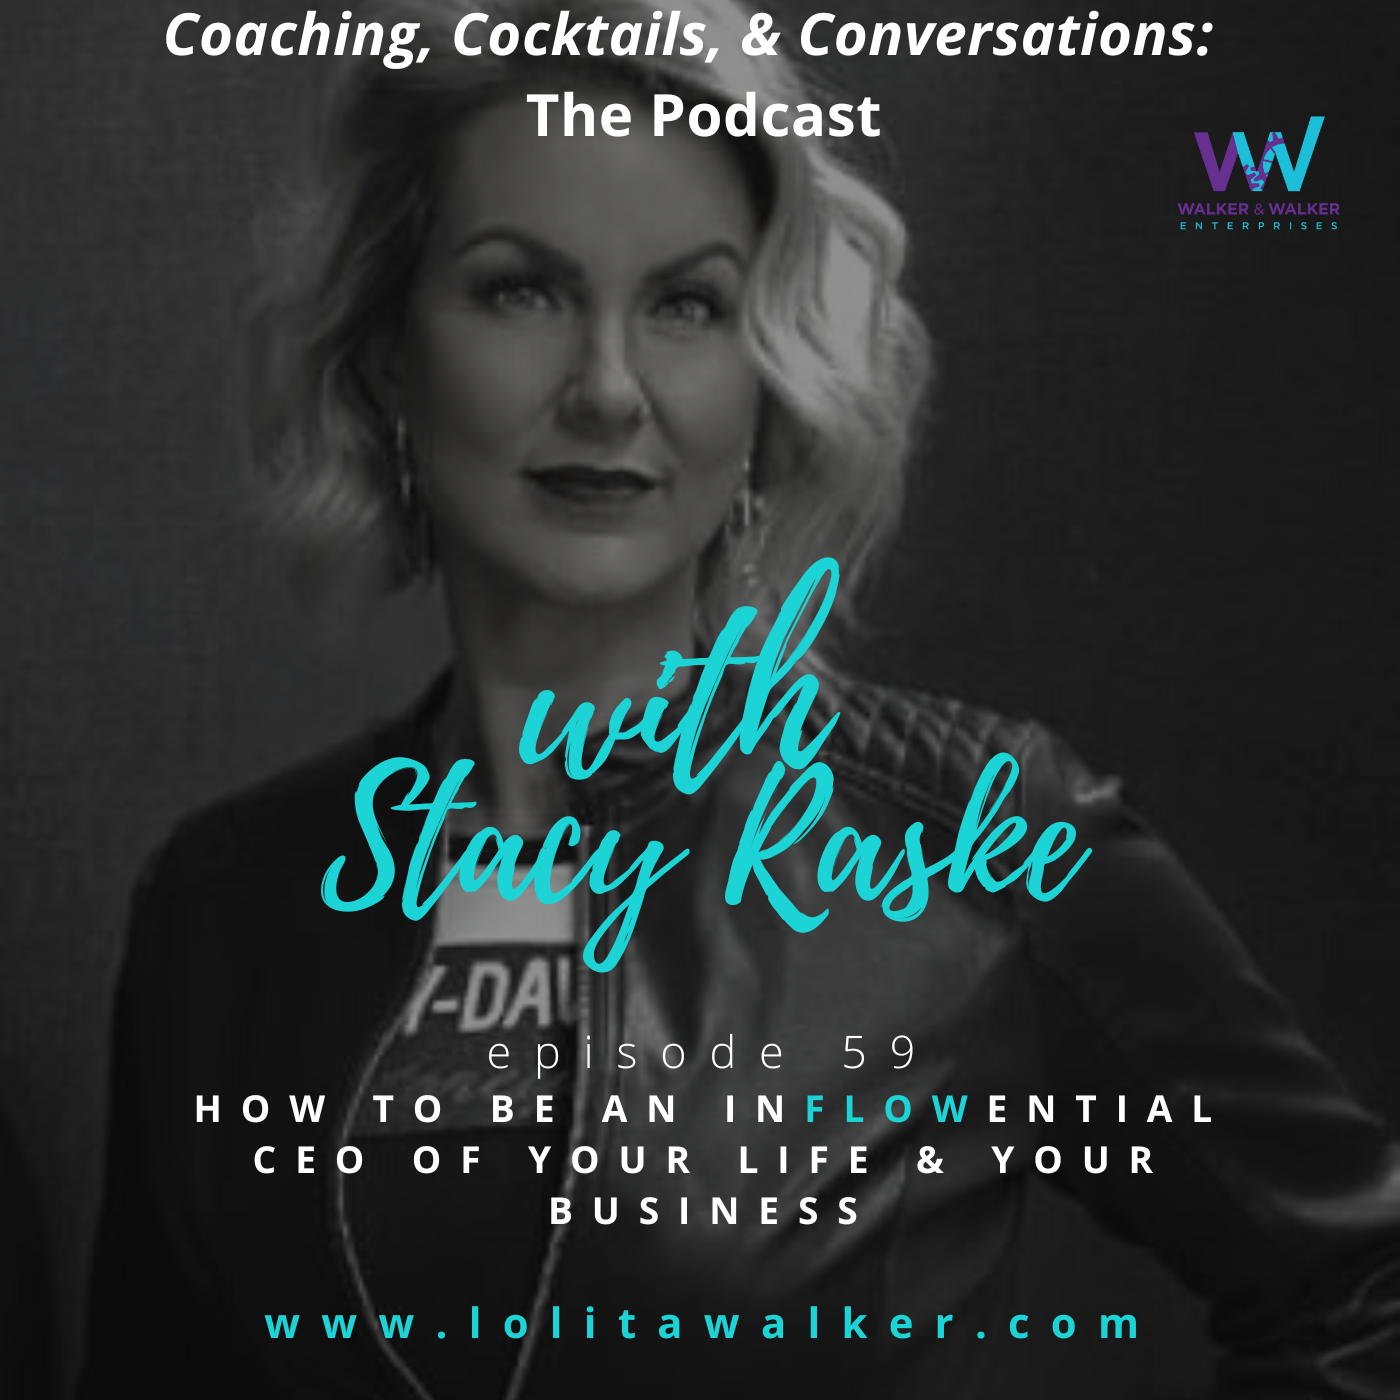 S3E59 - How to Become an inFLOWential CEO (with Stacy Raske)